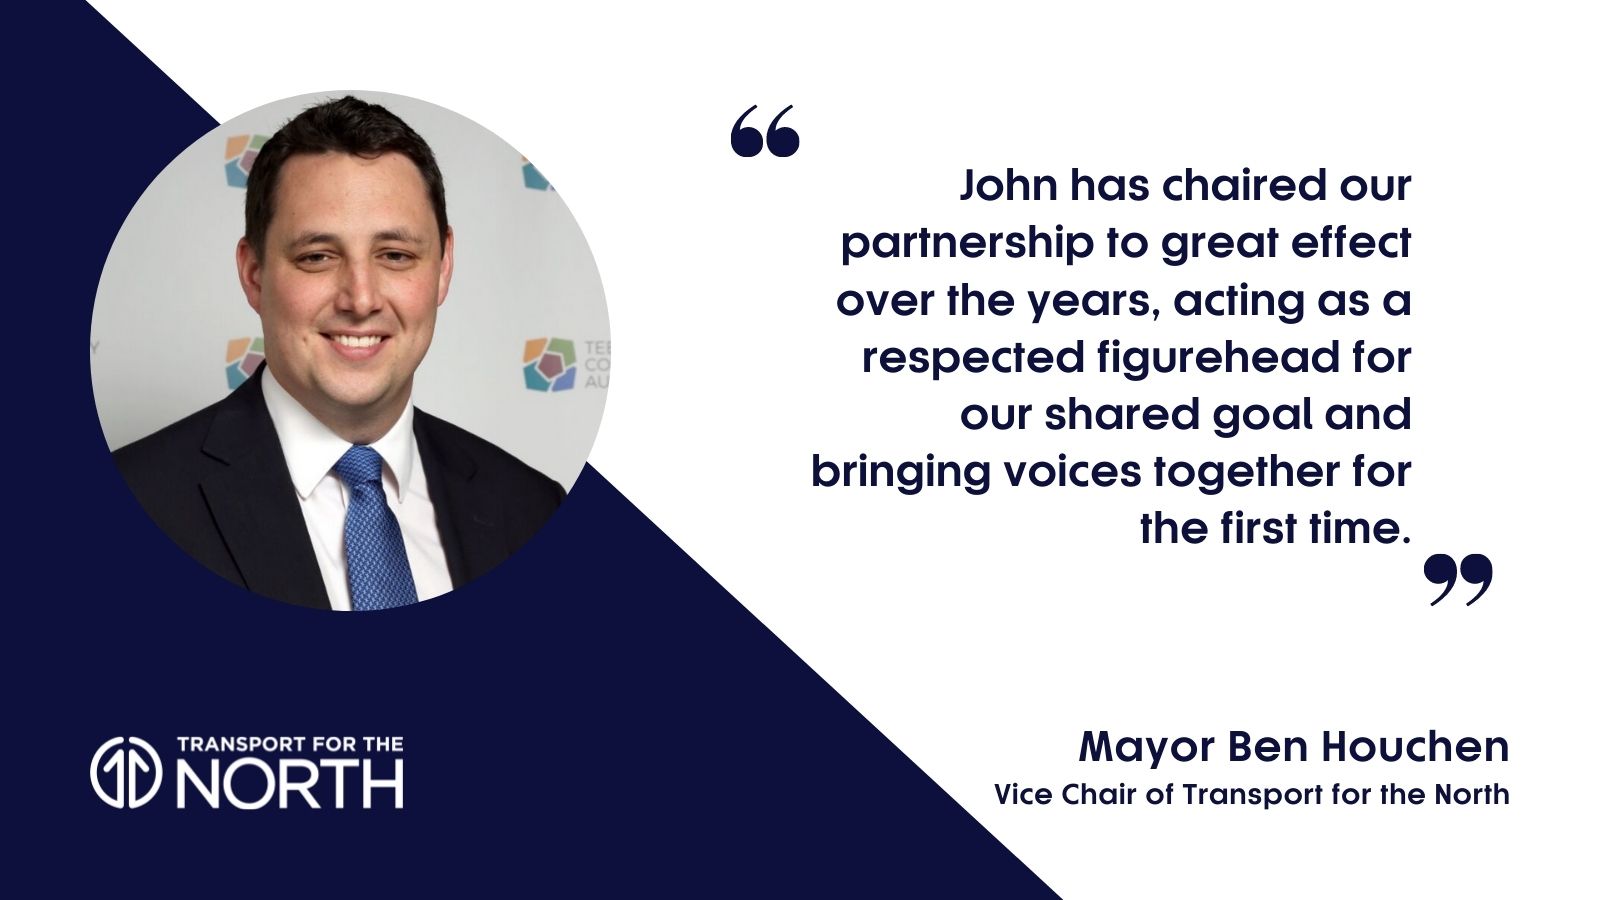 Mayor Ben Houchen, Vice Chair of Transport for the North, comments on John Cridland standing down as chairman